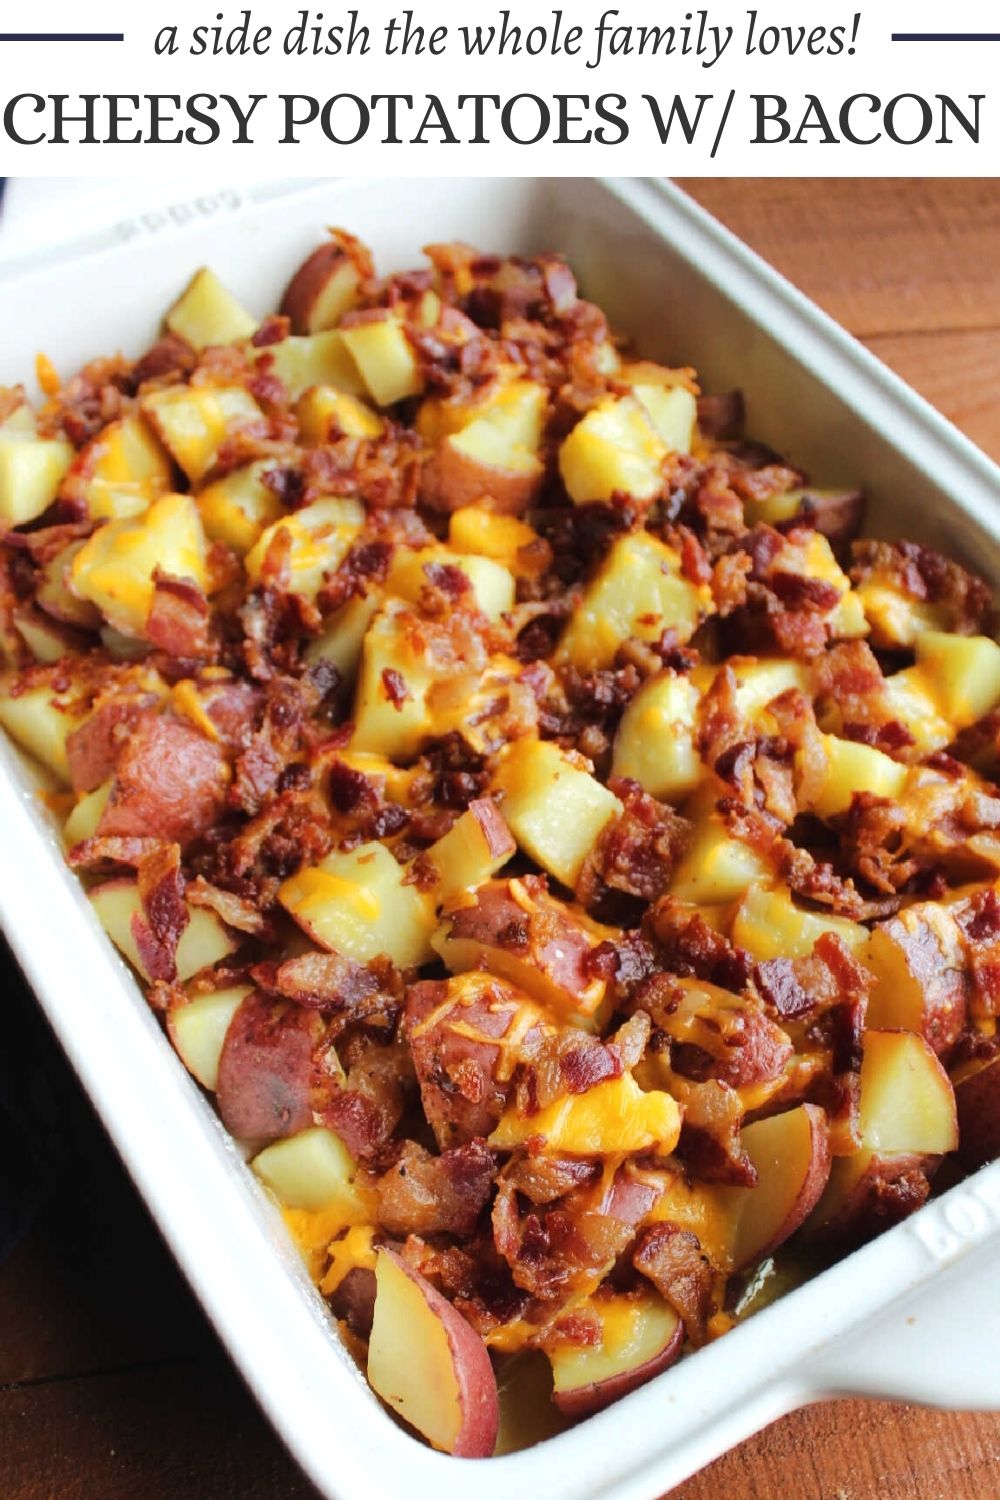 Cheesy potatoes with bacon are a popular side dish that go with almost any dinner. Bite sized pieces of tender potato are baked with butter, cheese and bacon making a simple but perfect casserole. Eat it as it is, or top it with sour cream and chives for a loaded baked potato like experience.